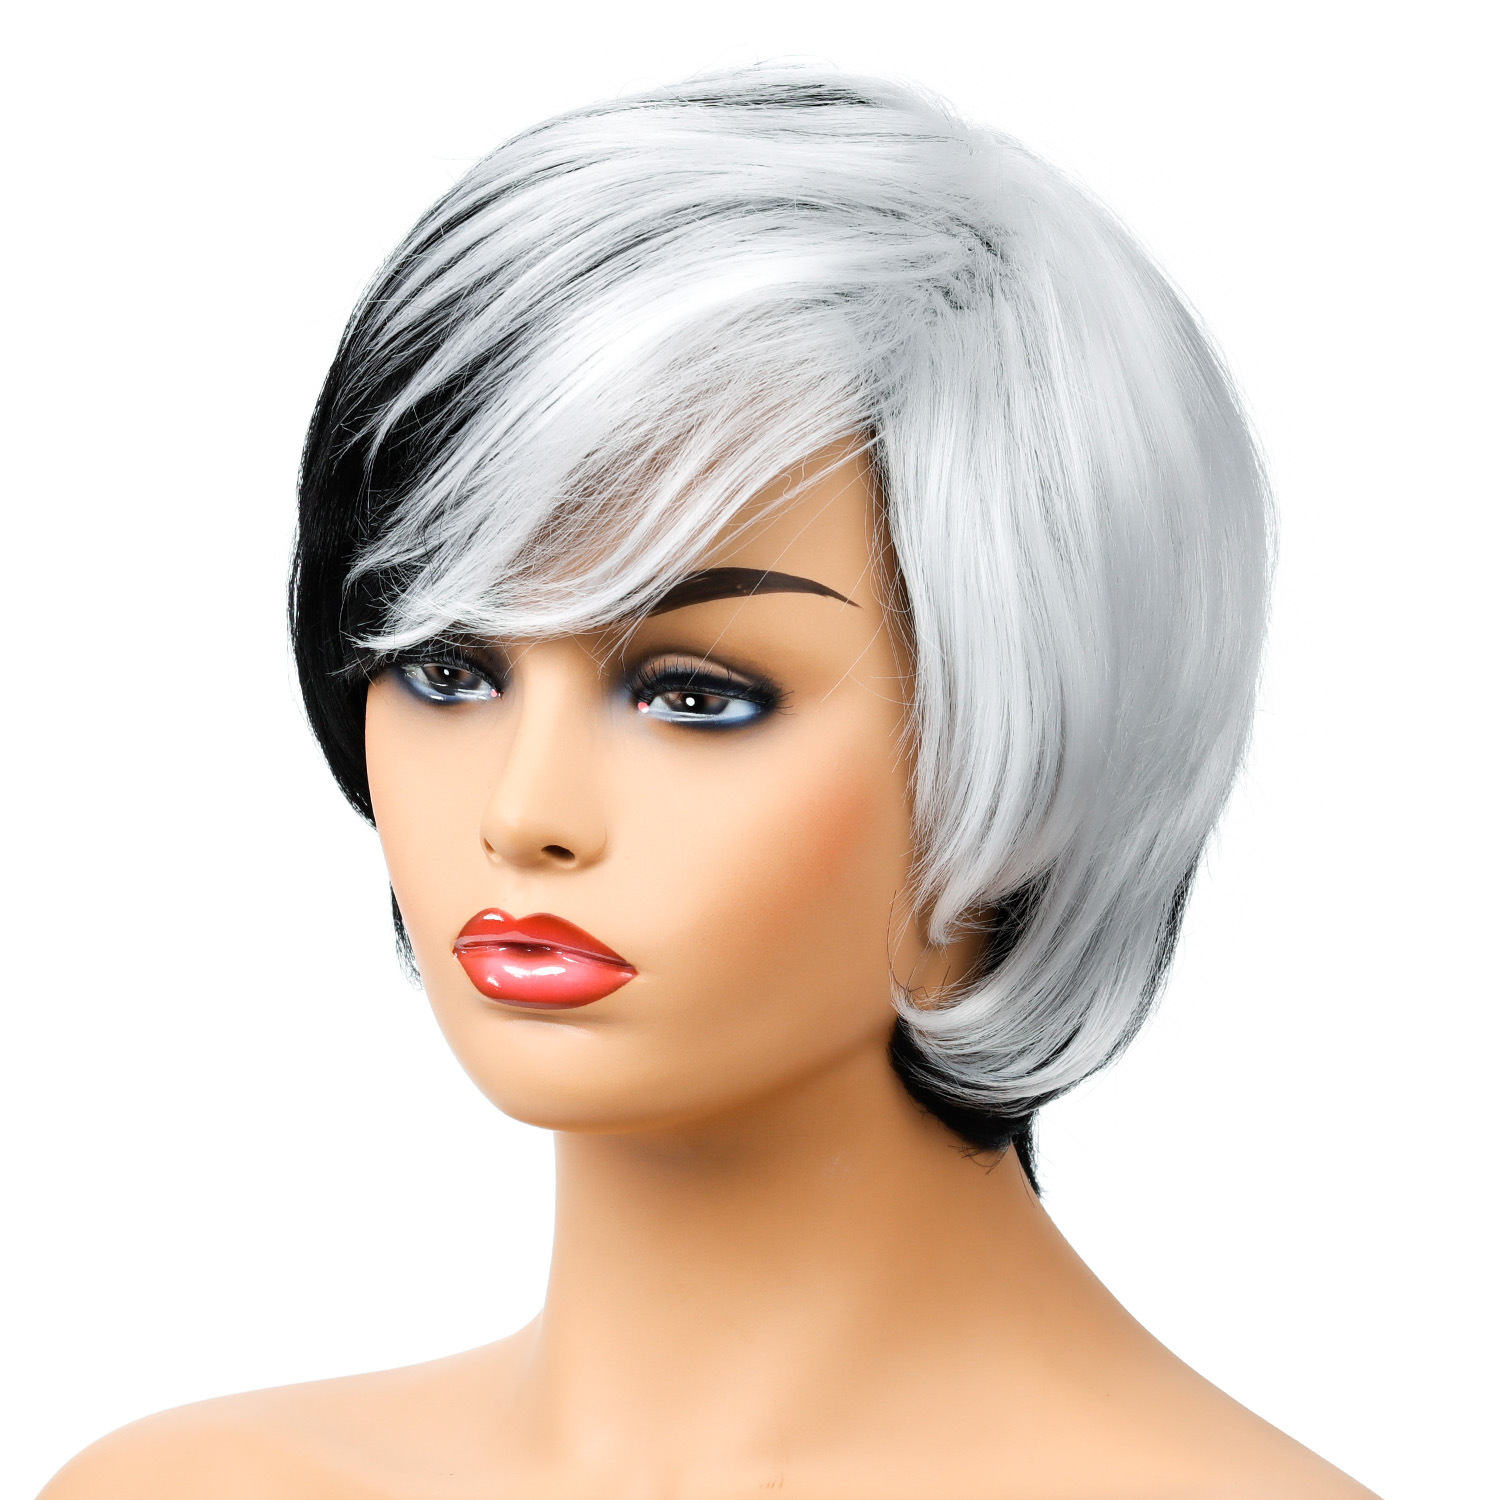  a stylish synthetic wig with black and white short hair, ideal for women